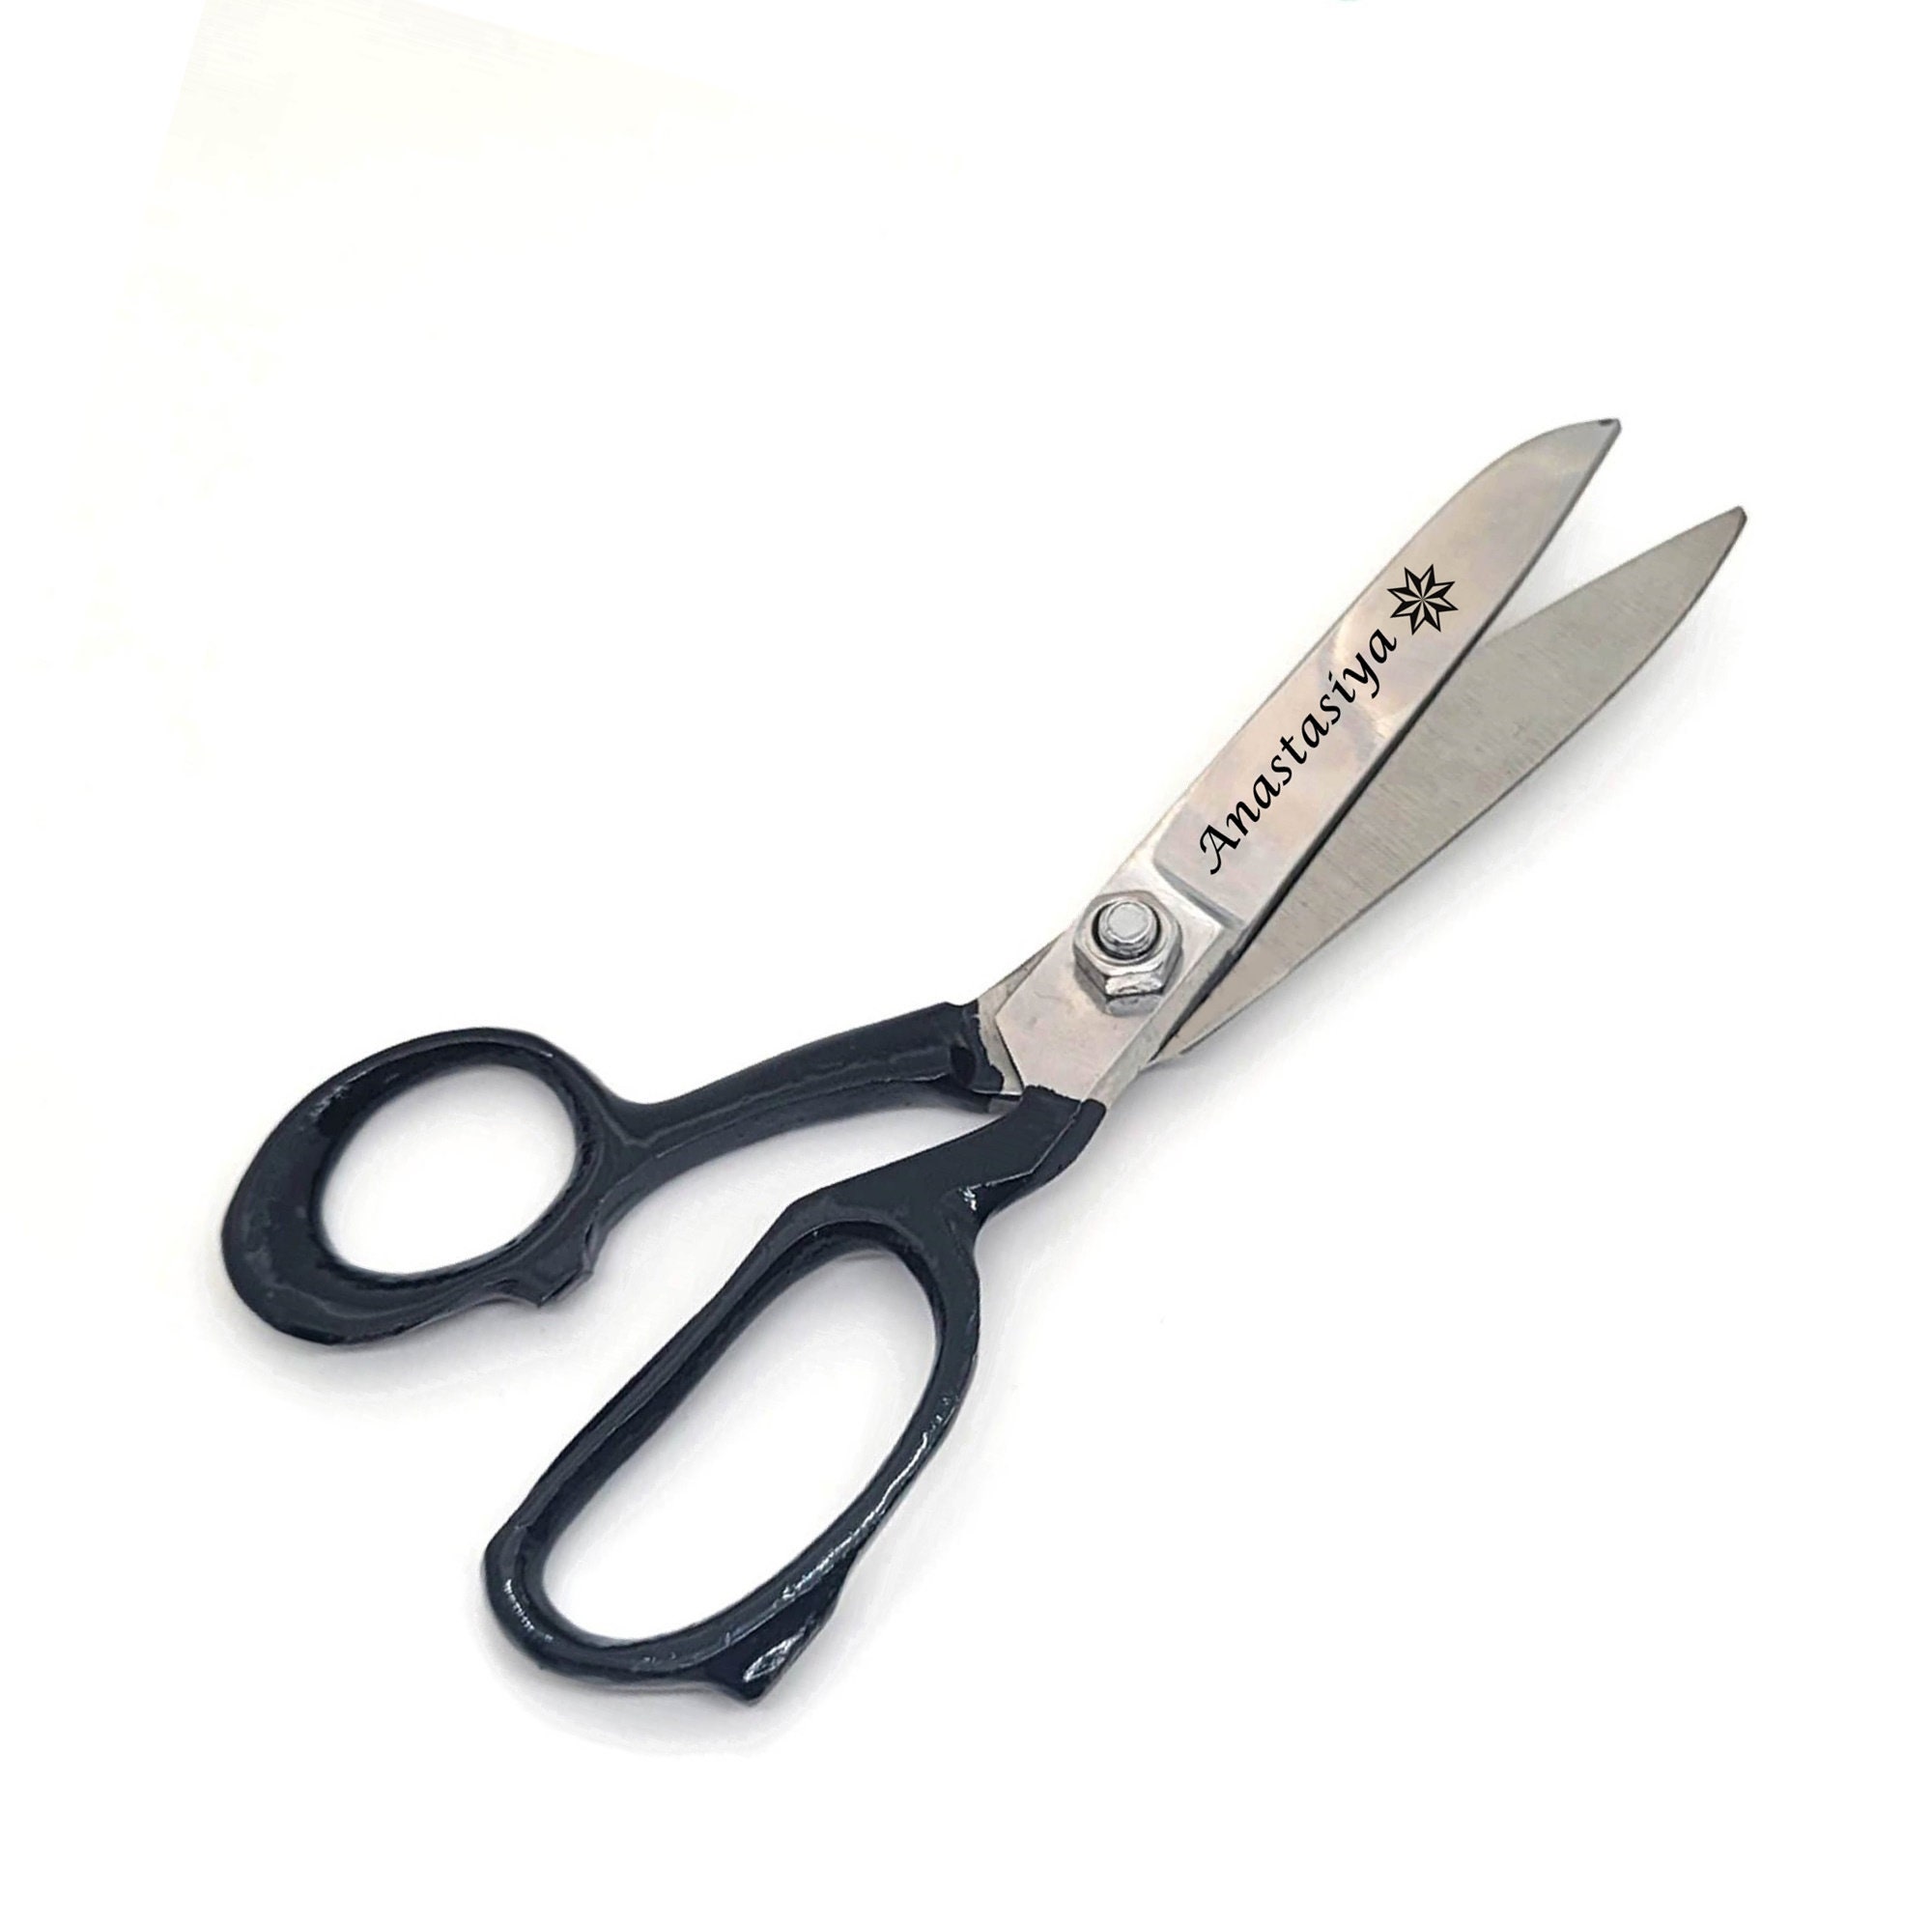  The Quilted Bear Fabric Scissors - 8.5 (21.5cm) Titanium  Precision Blade Sharp Heavy Duty Scissors Great as Sewing Scissors for Fabric  Cutting & Crafting with Multiple Designs! (Leopard Print) : Arts